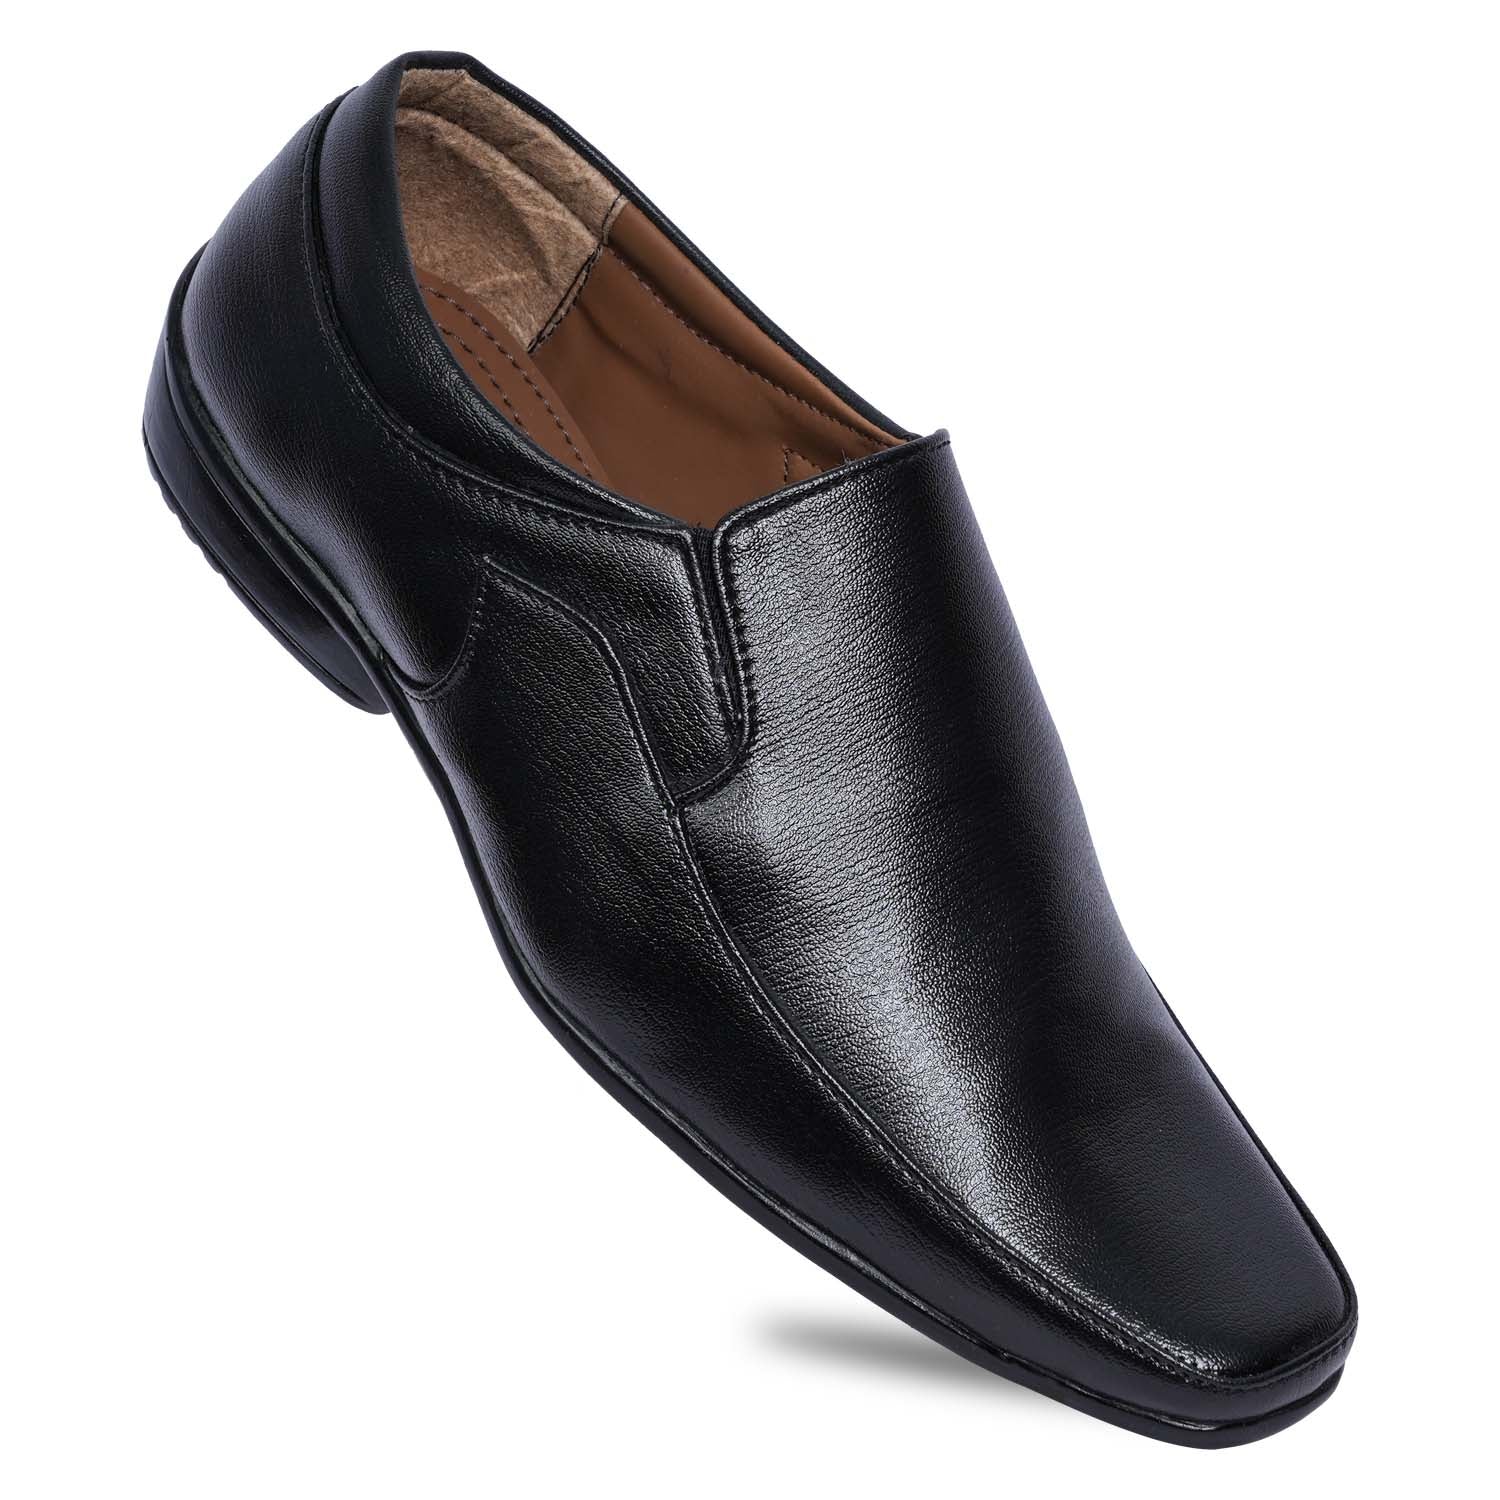 Paragon R2002G Men Formal Shoes | Corporate Office Shoes | Smart &amp; Sleek Design | Comfortable Sole with Cushioning | Daily &amp; Occasion Wear